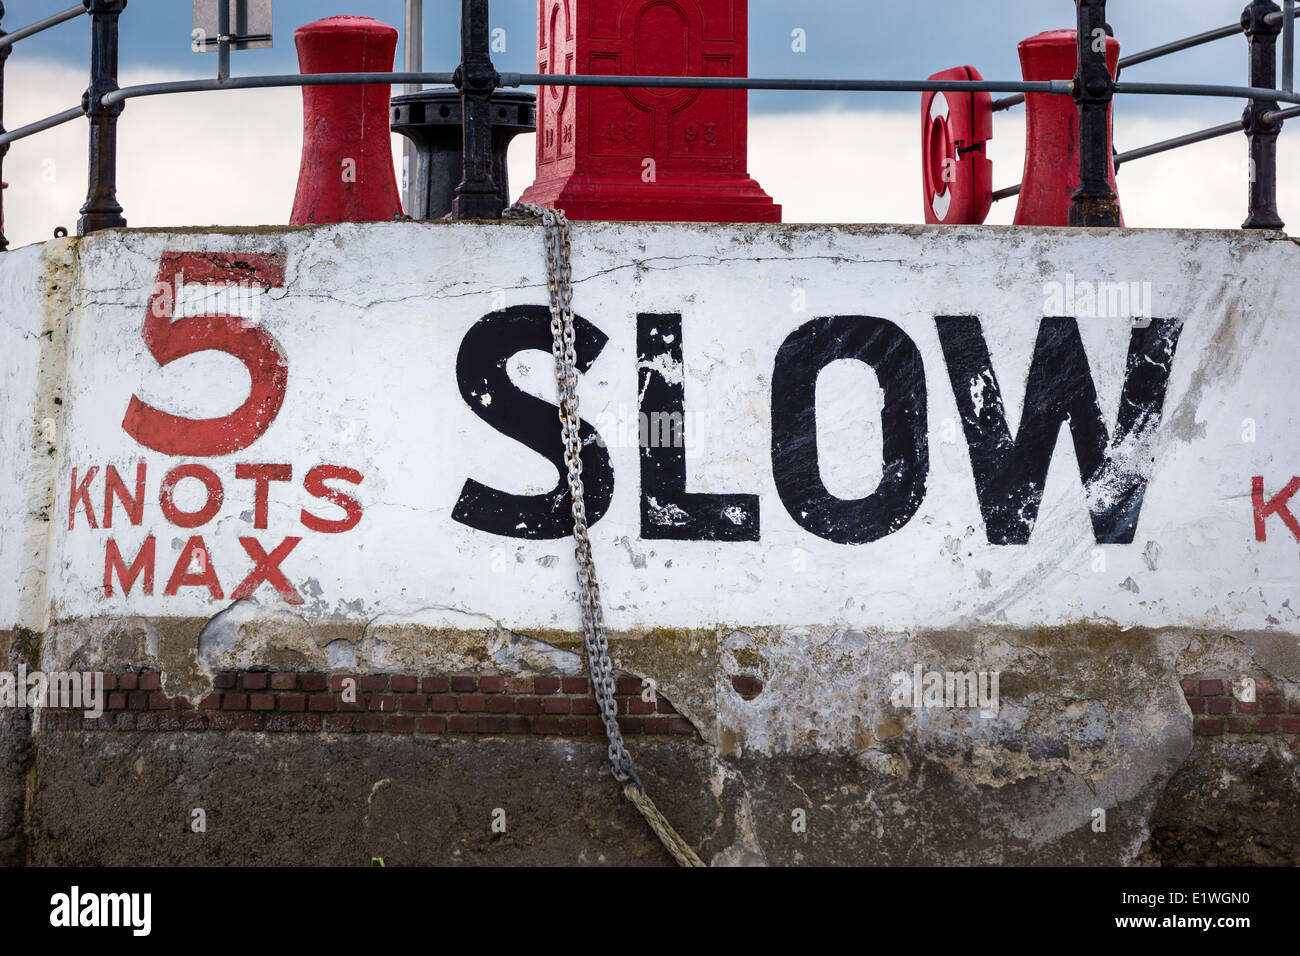 5 Knots Max - SLOW. The warning on the entrance to the harbour at Torquay, Devon - England. Stock Photo